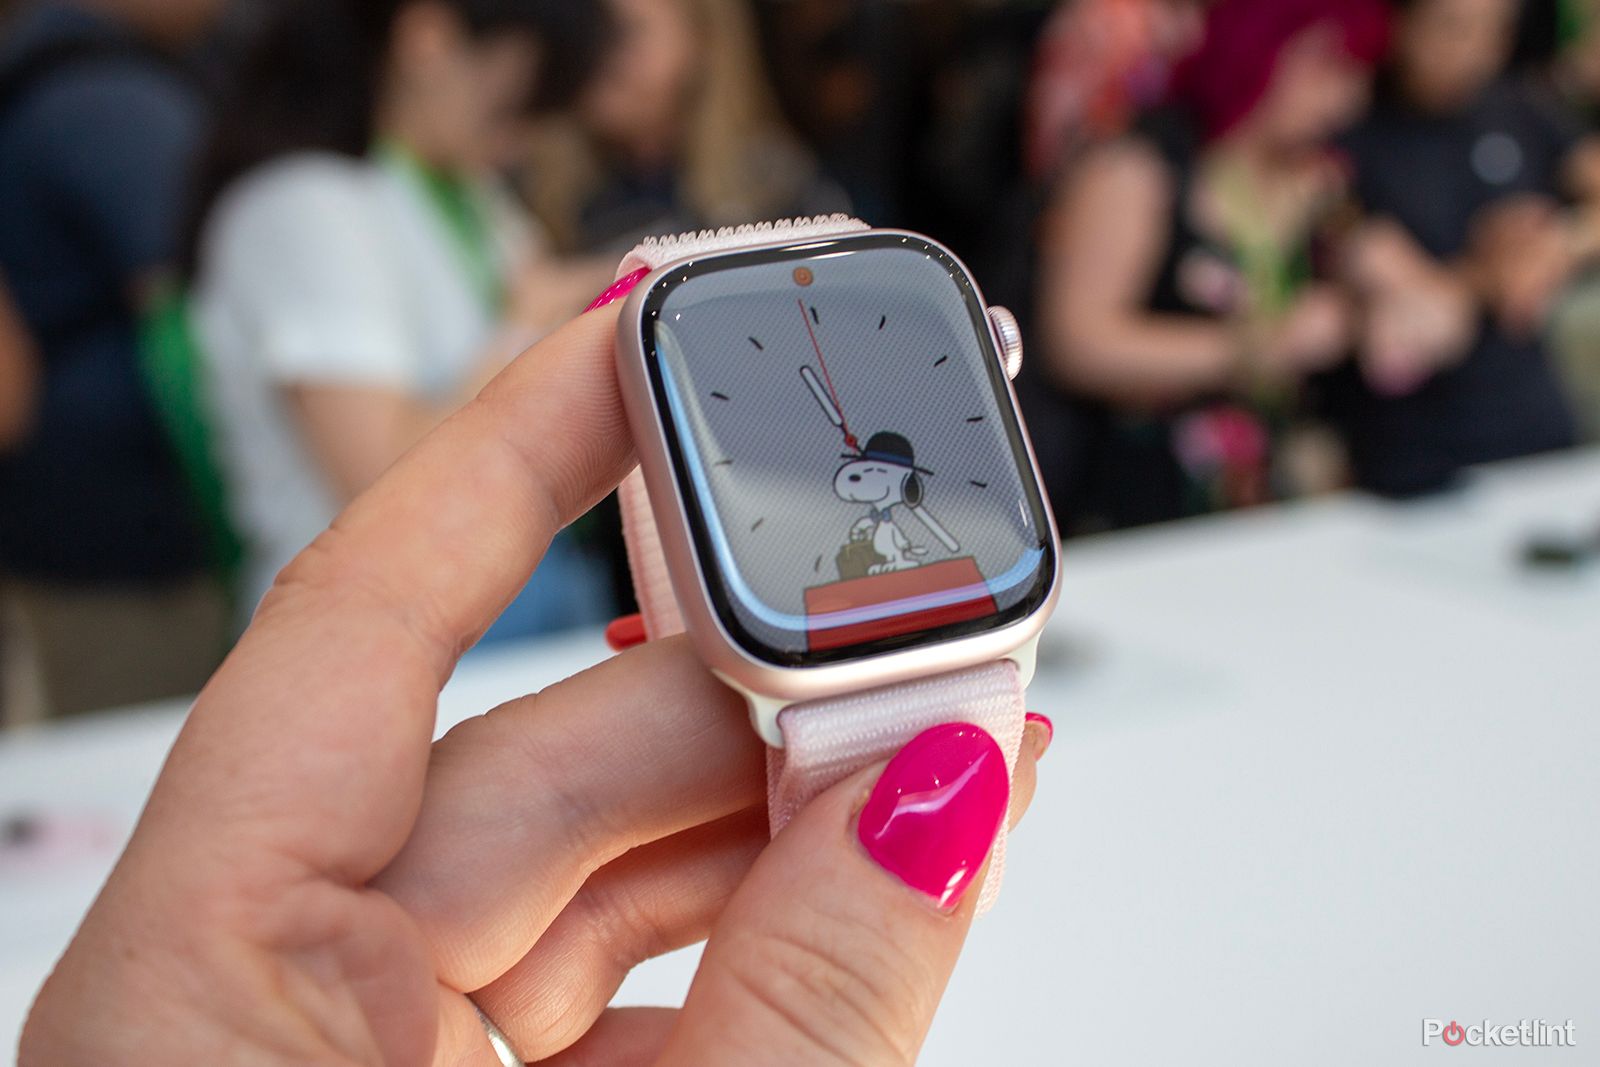 Next Apple Watch to detect blood pressure, sleep apnea; health coach  service reportedly in works